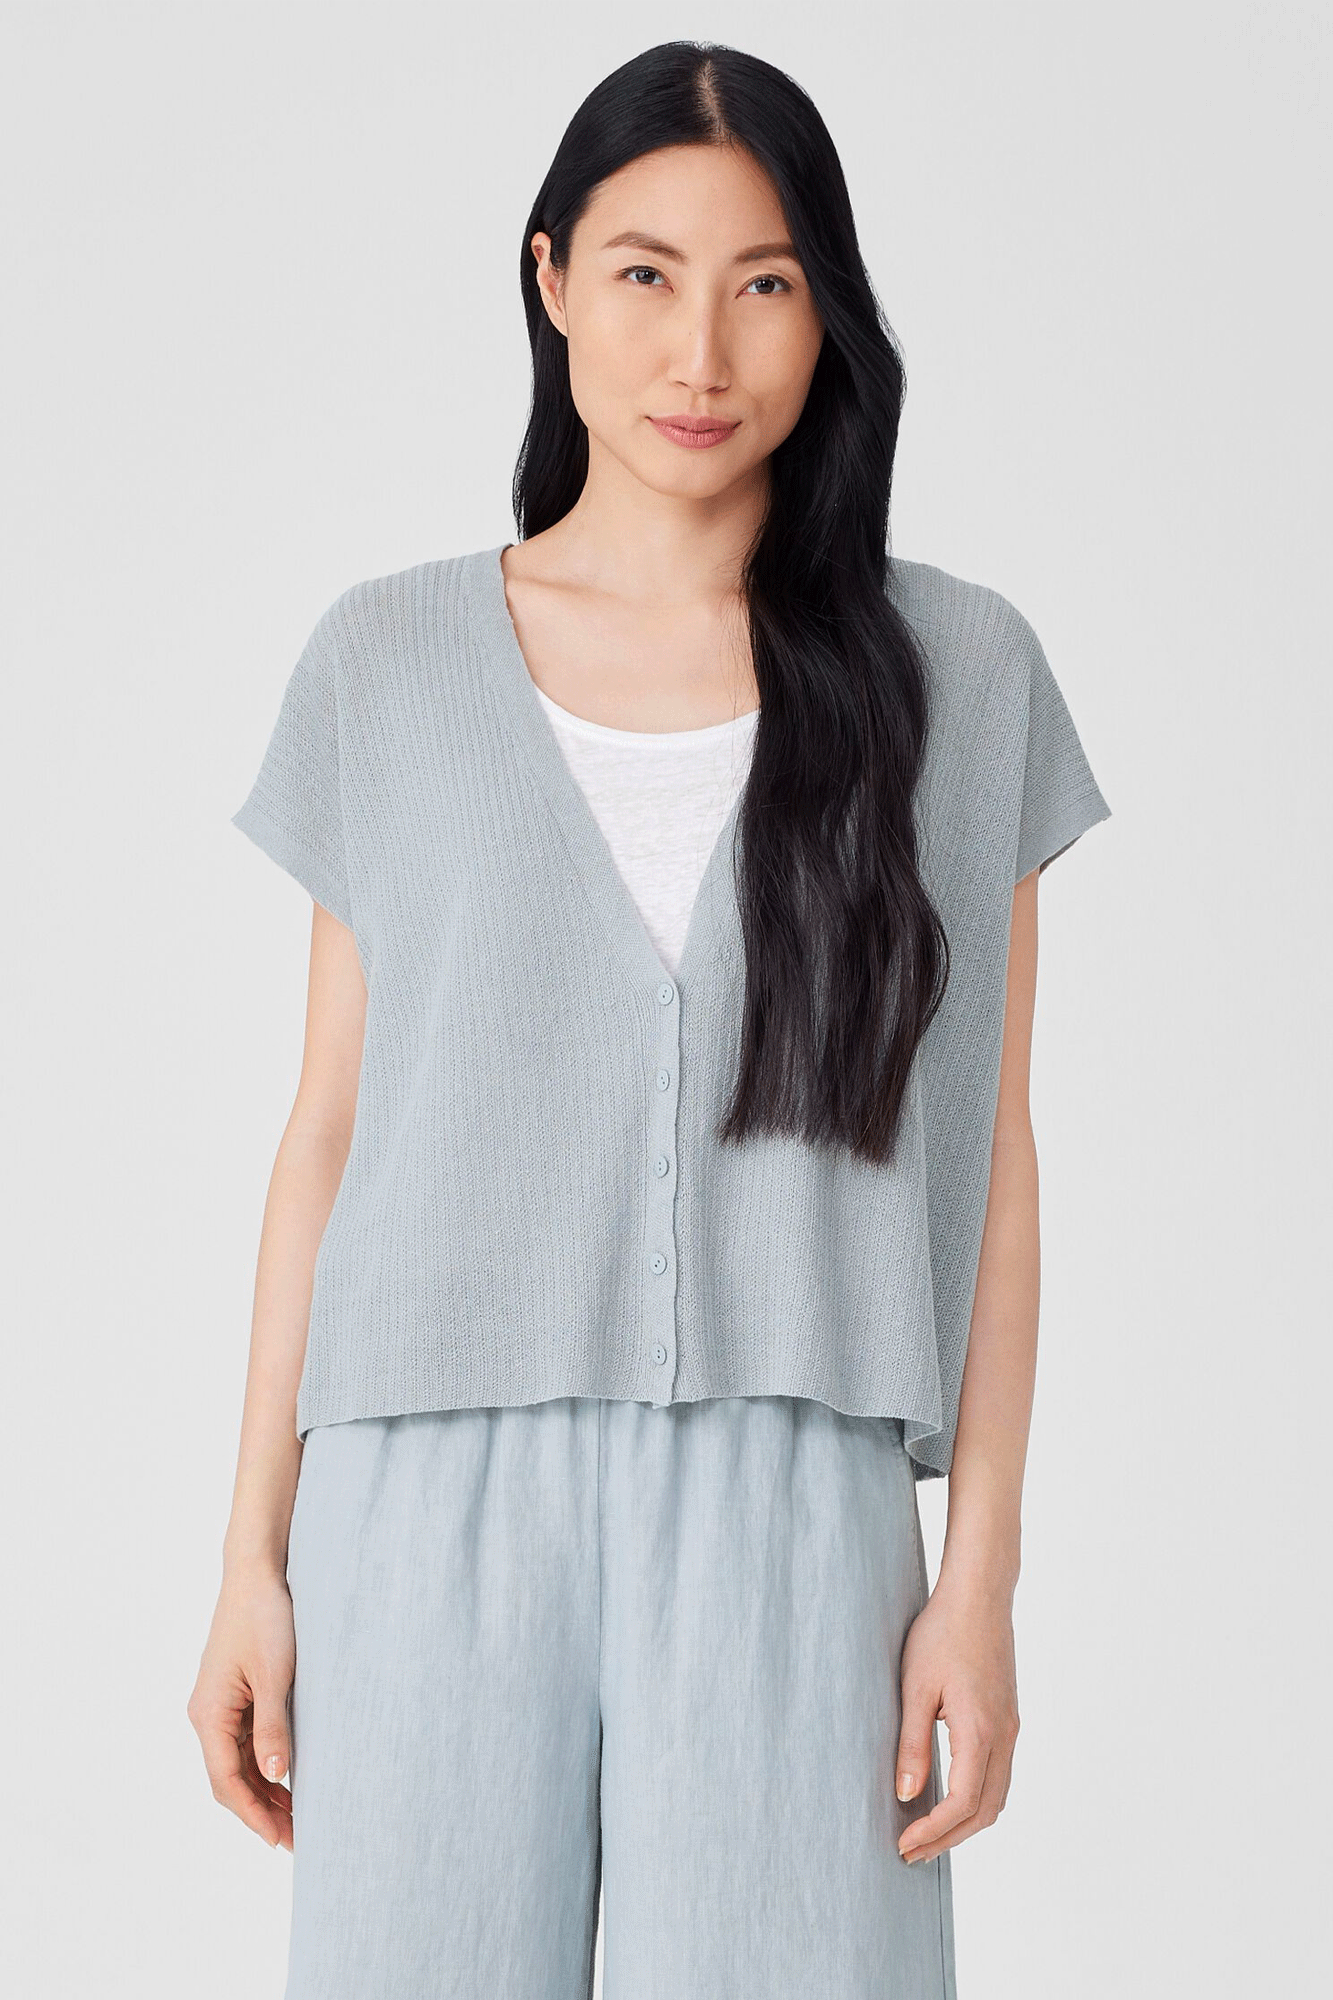 This two-in-one cardigan and vest from Eileen Fisher is crafted from a light blend of organic linen and cotton, creating a breezy, effortless layer for your wardrobe.